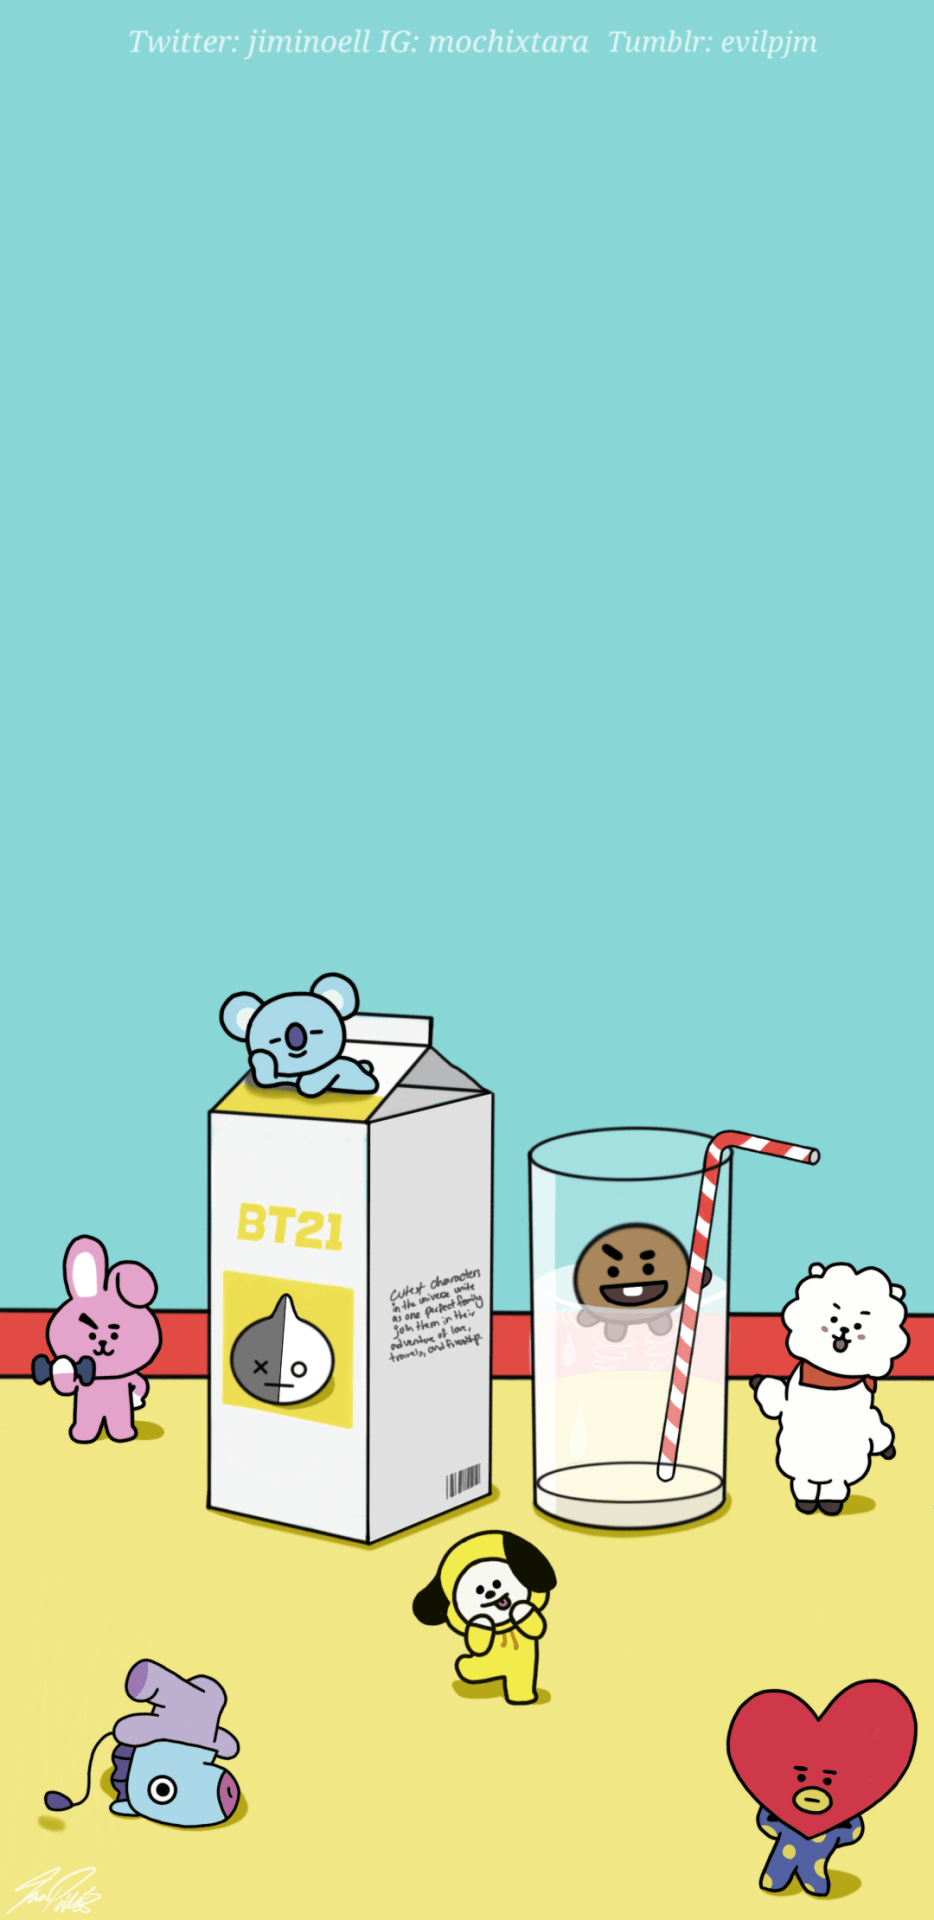 A poster with various cartoon characters and milk - BT21